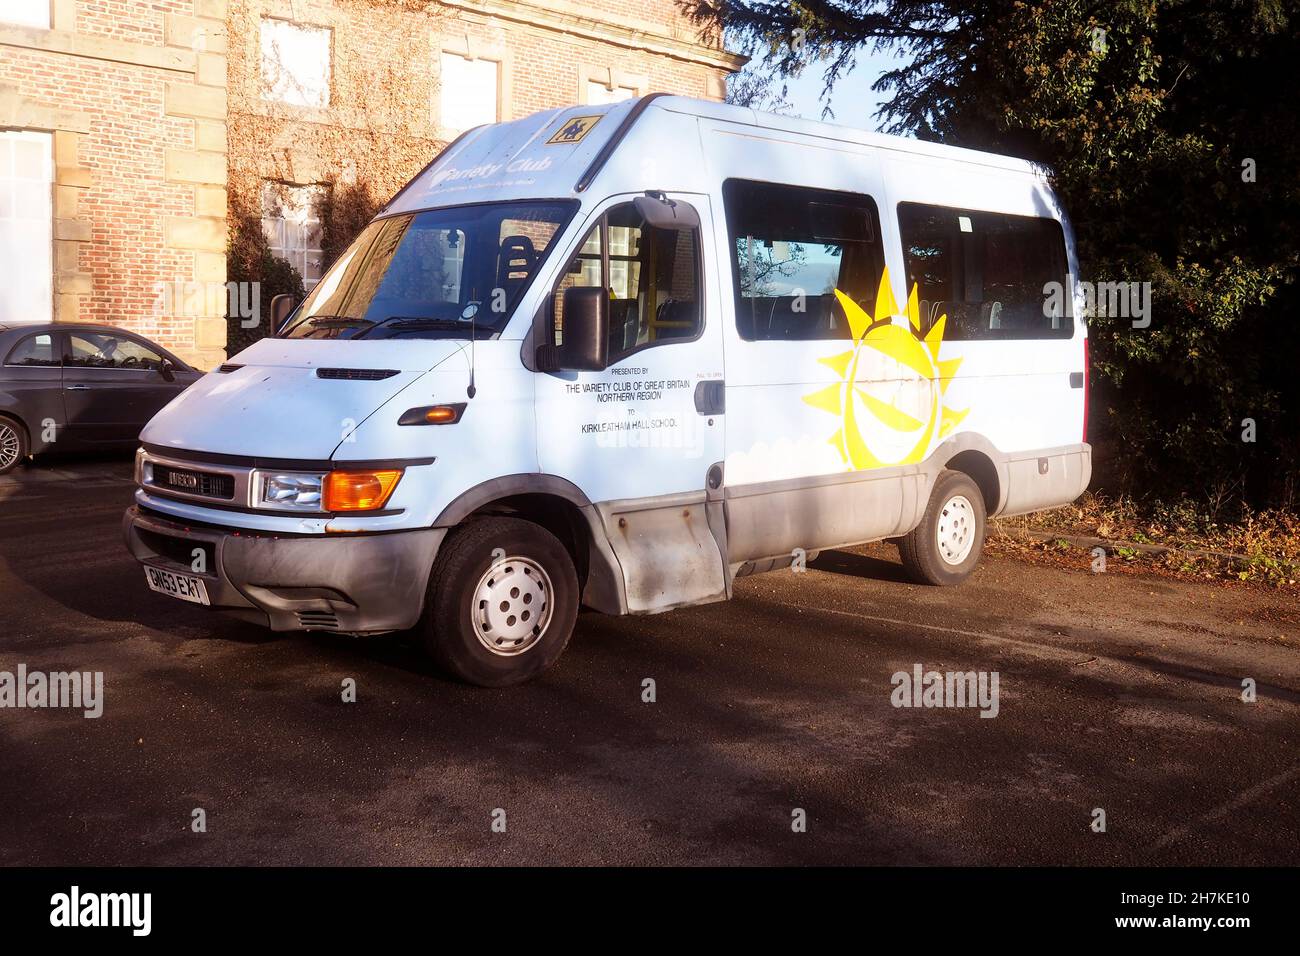 A school minibus presented to Kirkleatham Hall School by the Variety Club of Great Britain Noethern Region Stock Photo